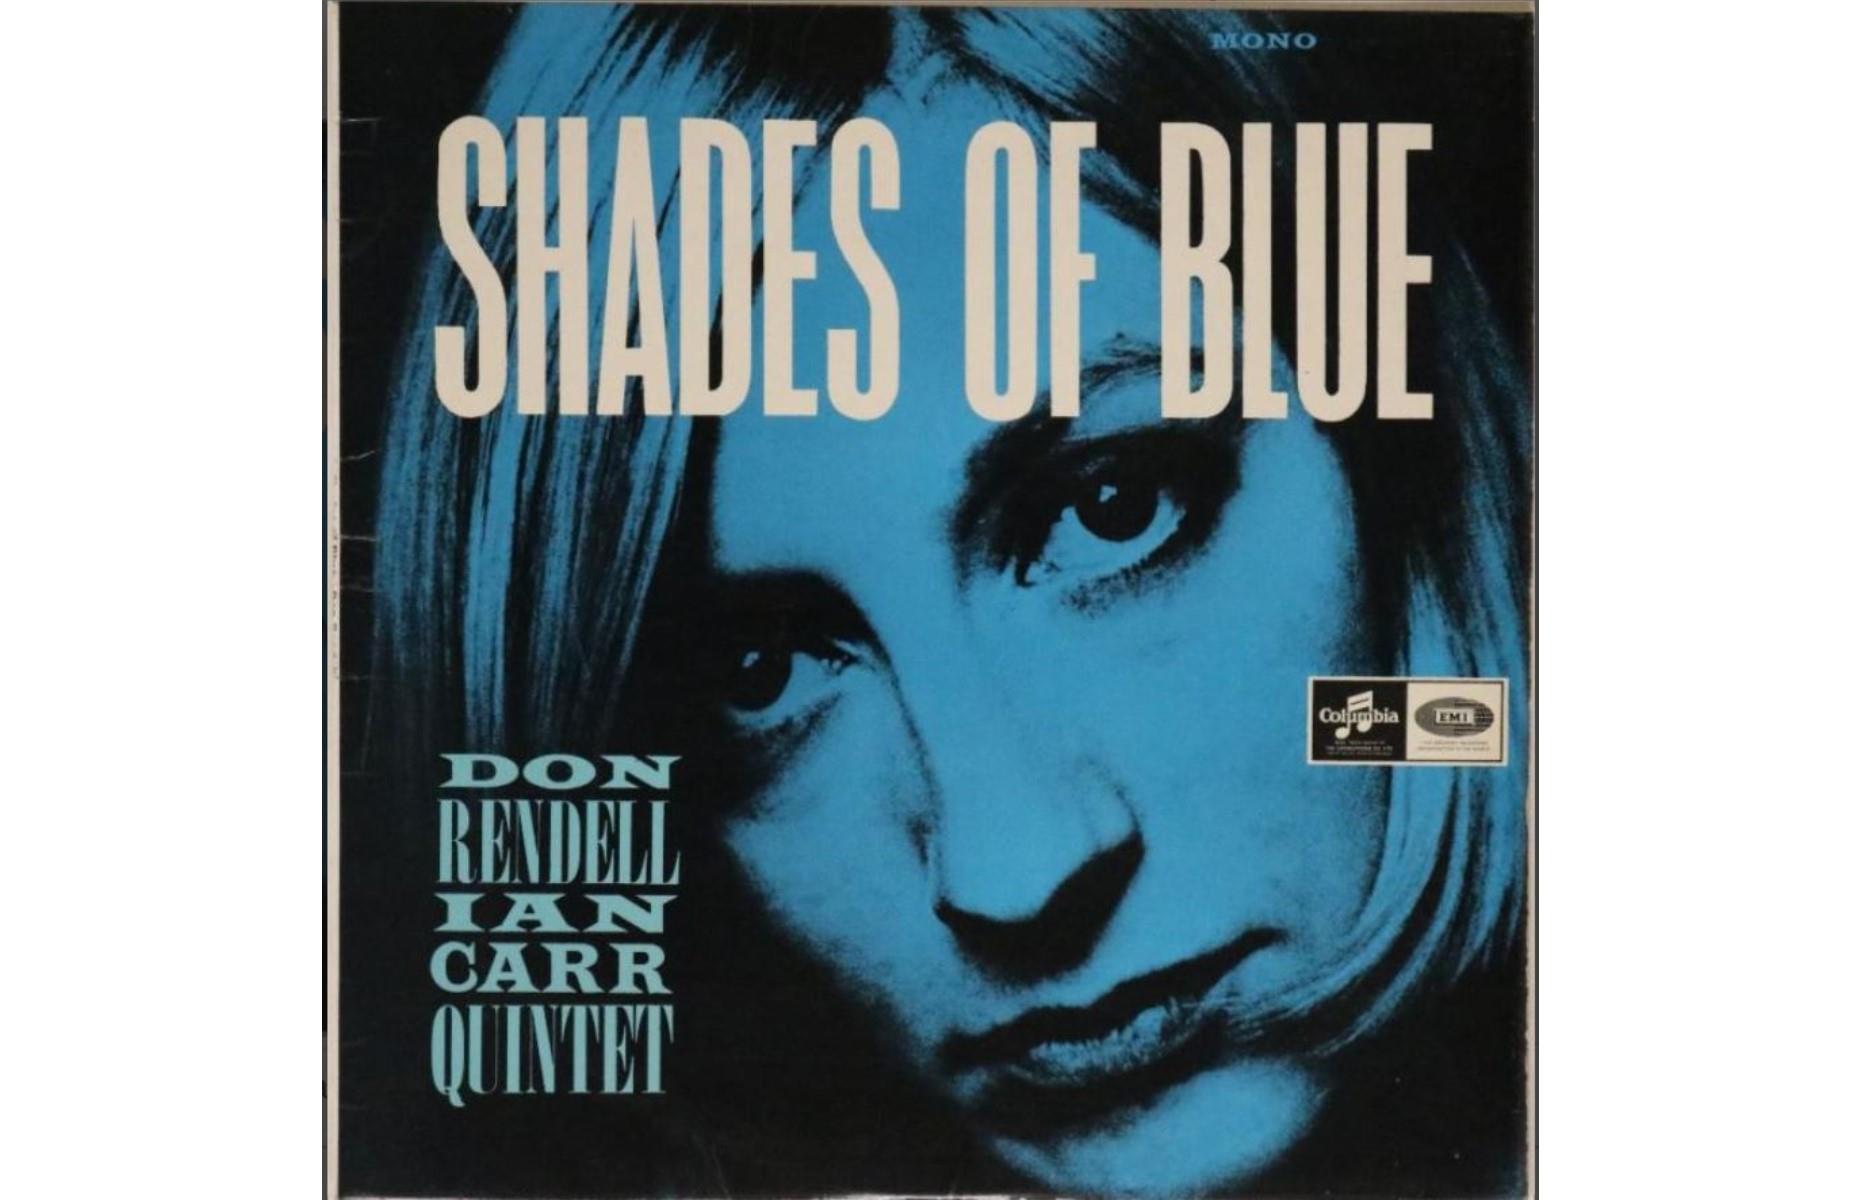 Don Rendell/Ian Carr Quintet – Shades of Blue: £800